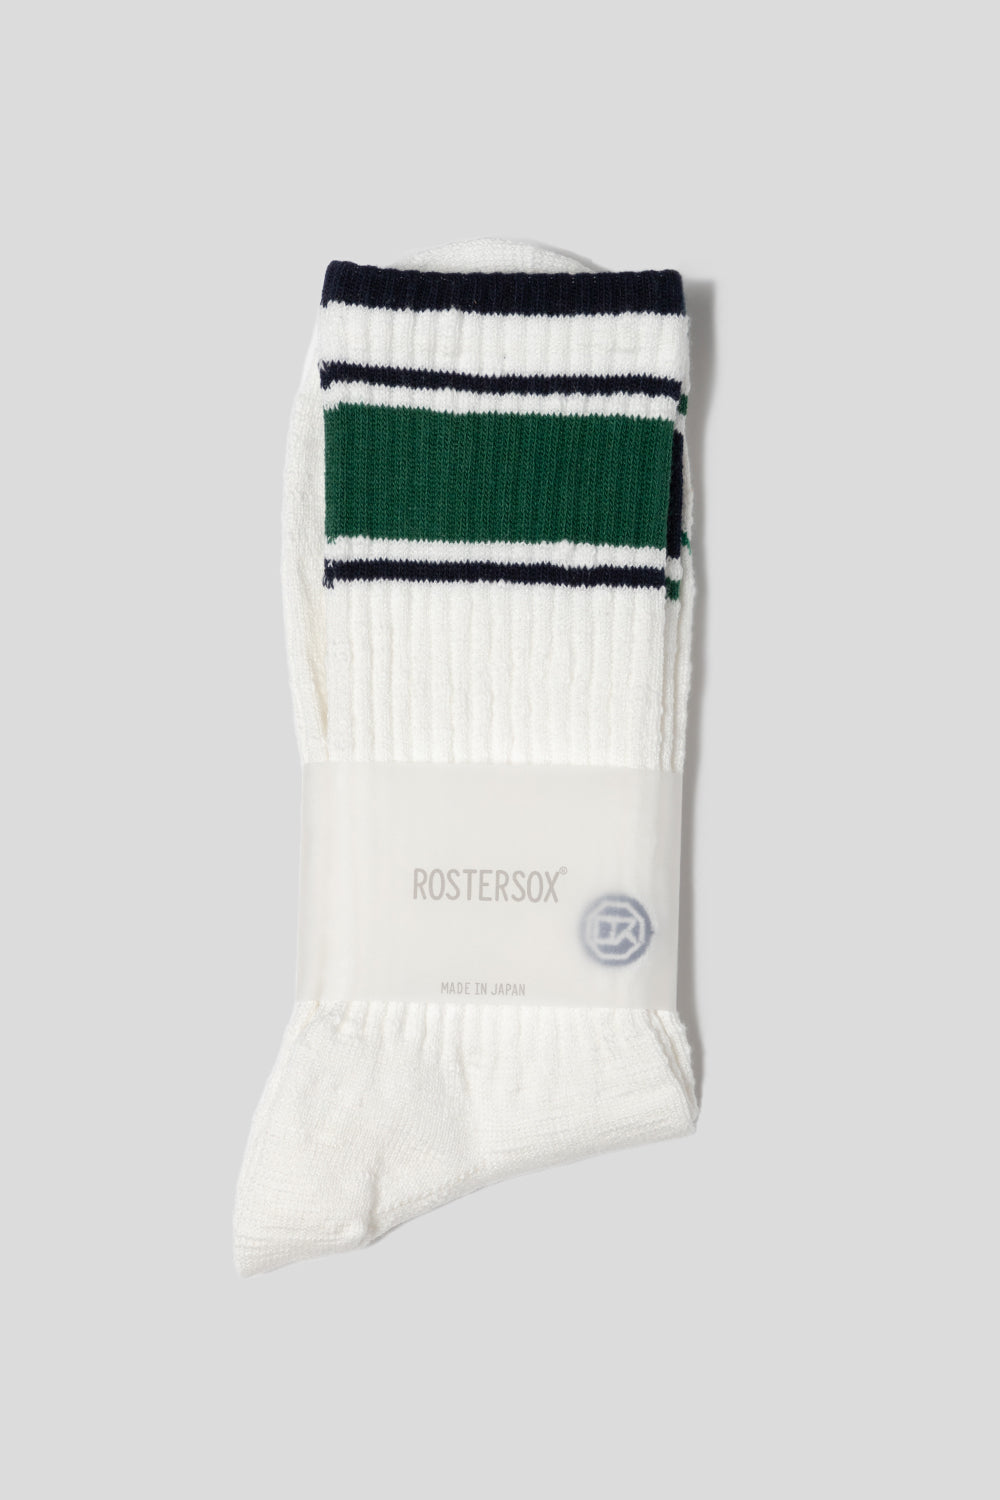 Rostersox R ROS Socks in Green